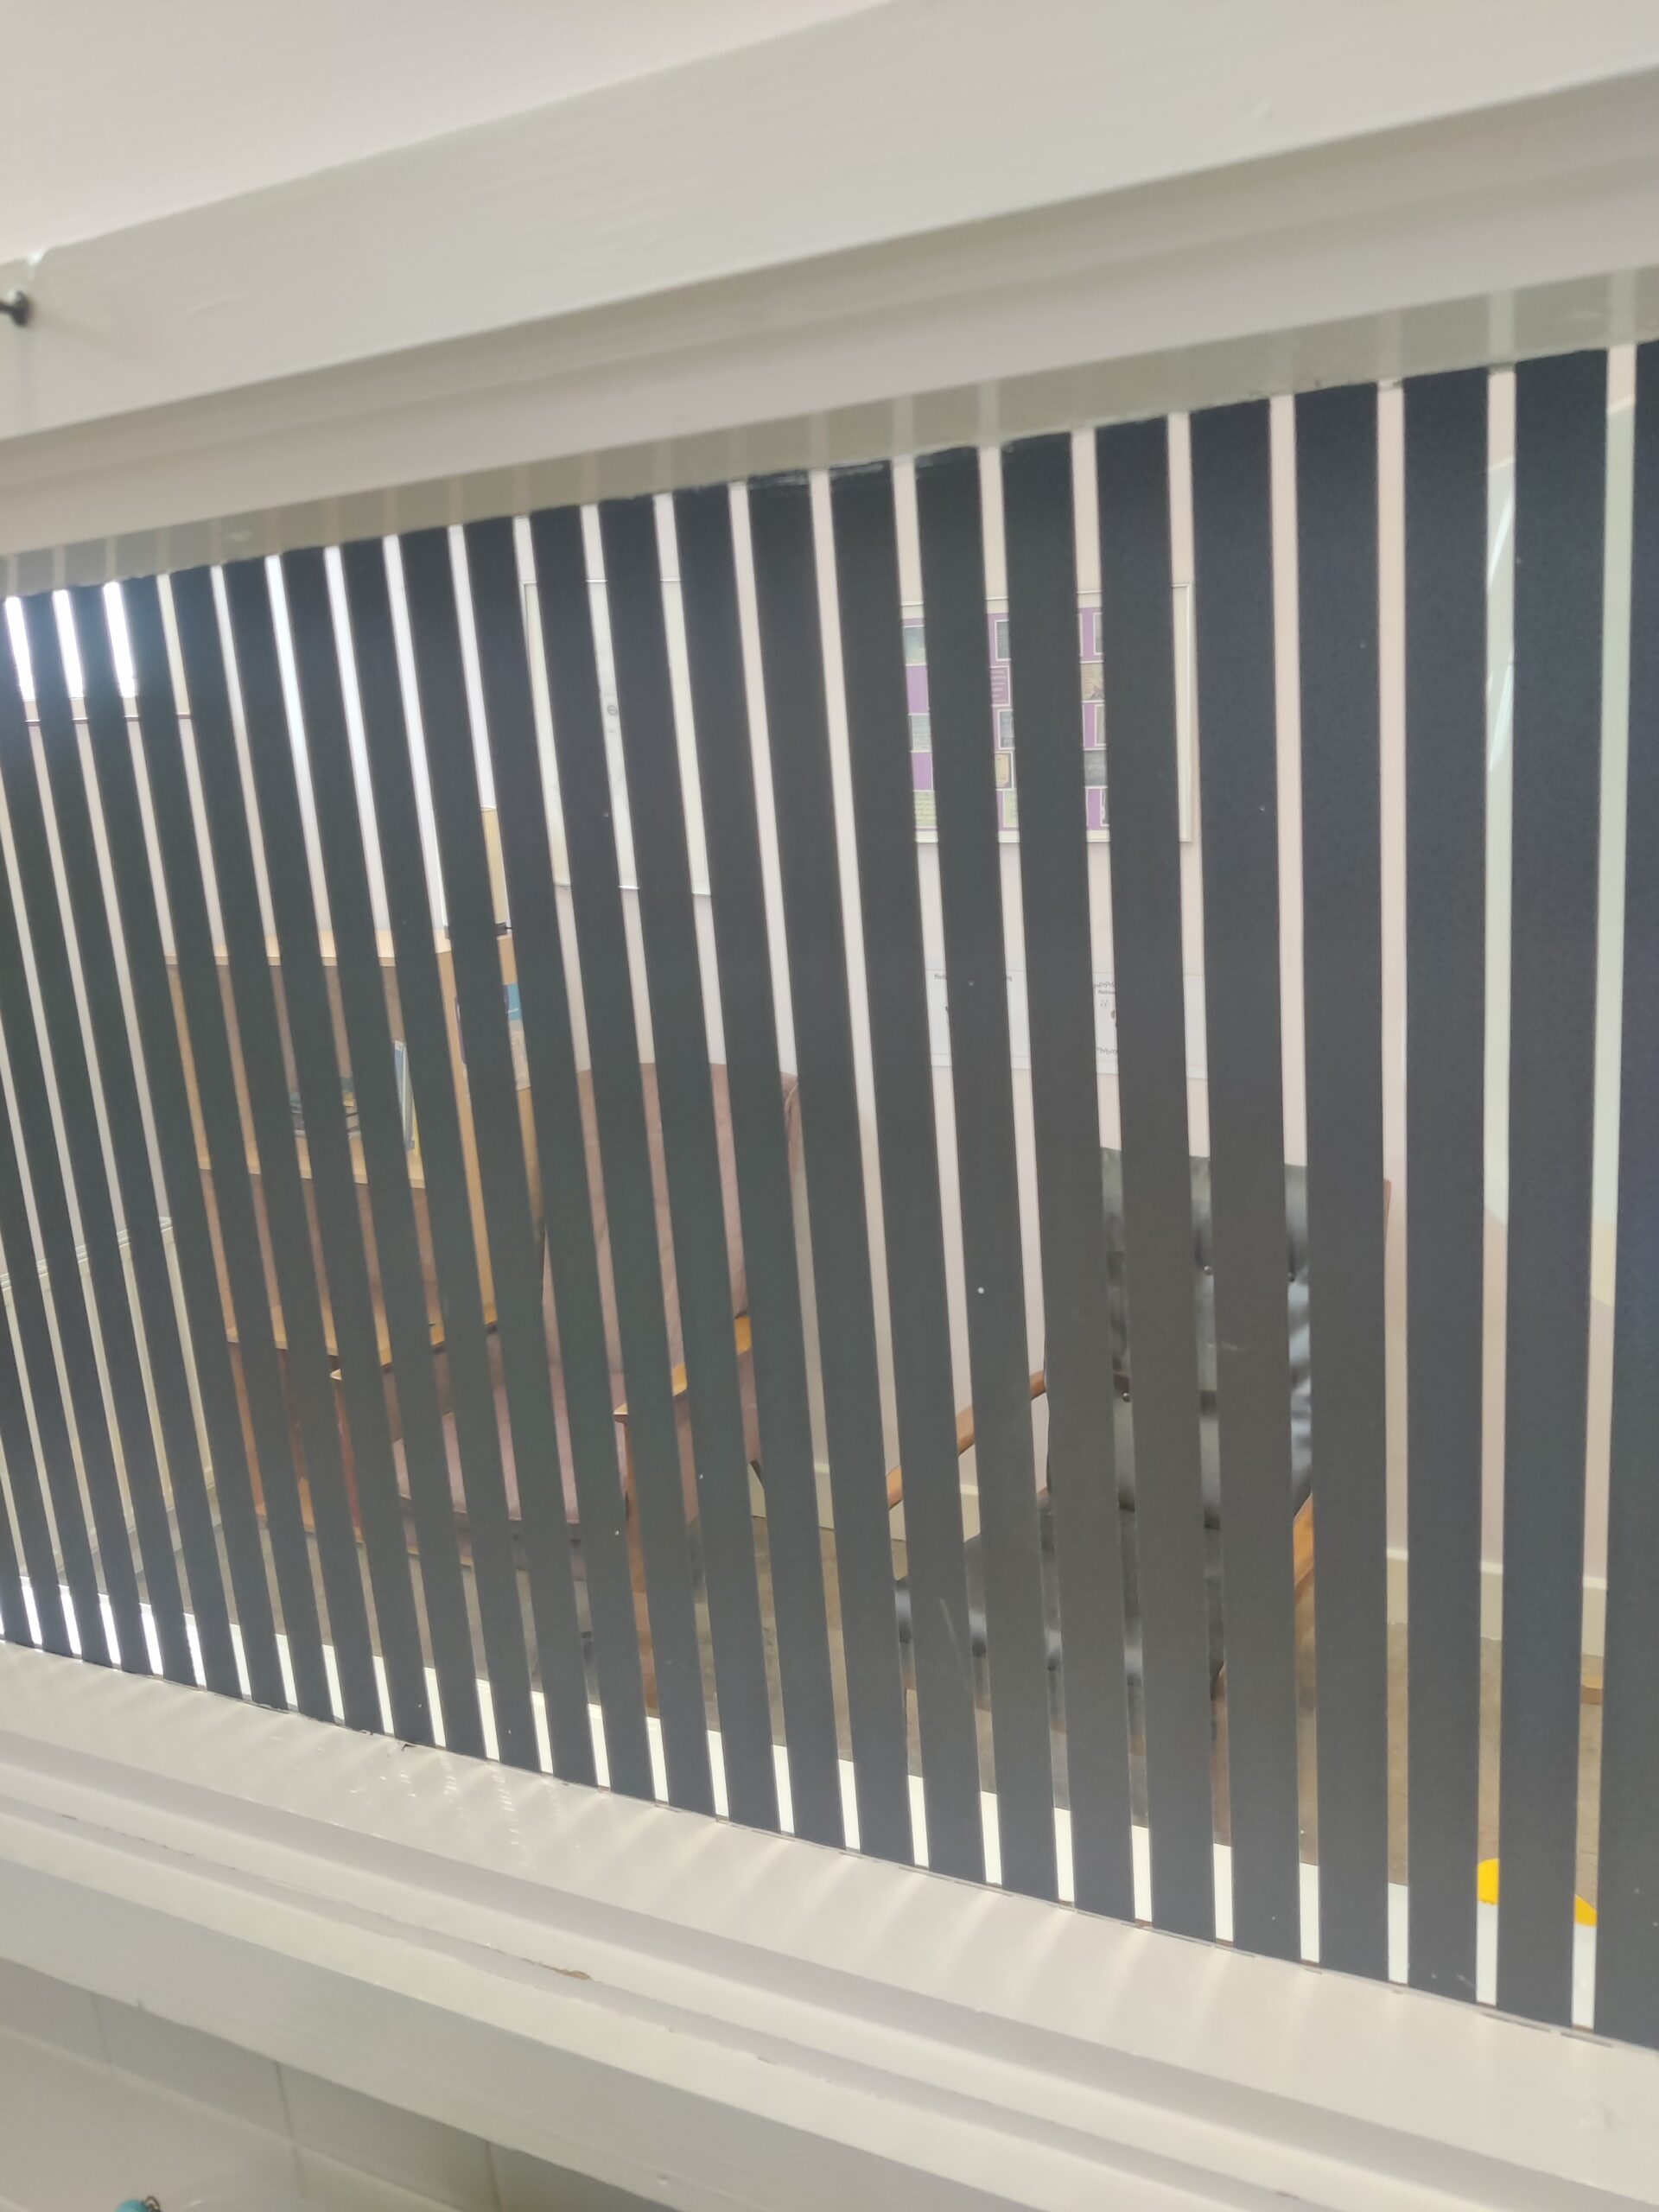 A window with vertical slats. The room behind the window has chairs and bookshelf in it.